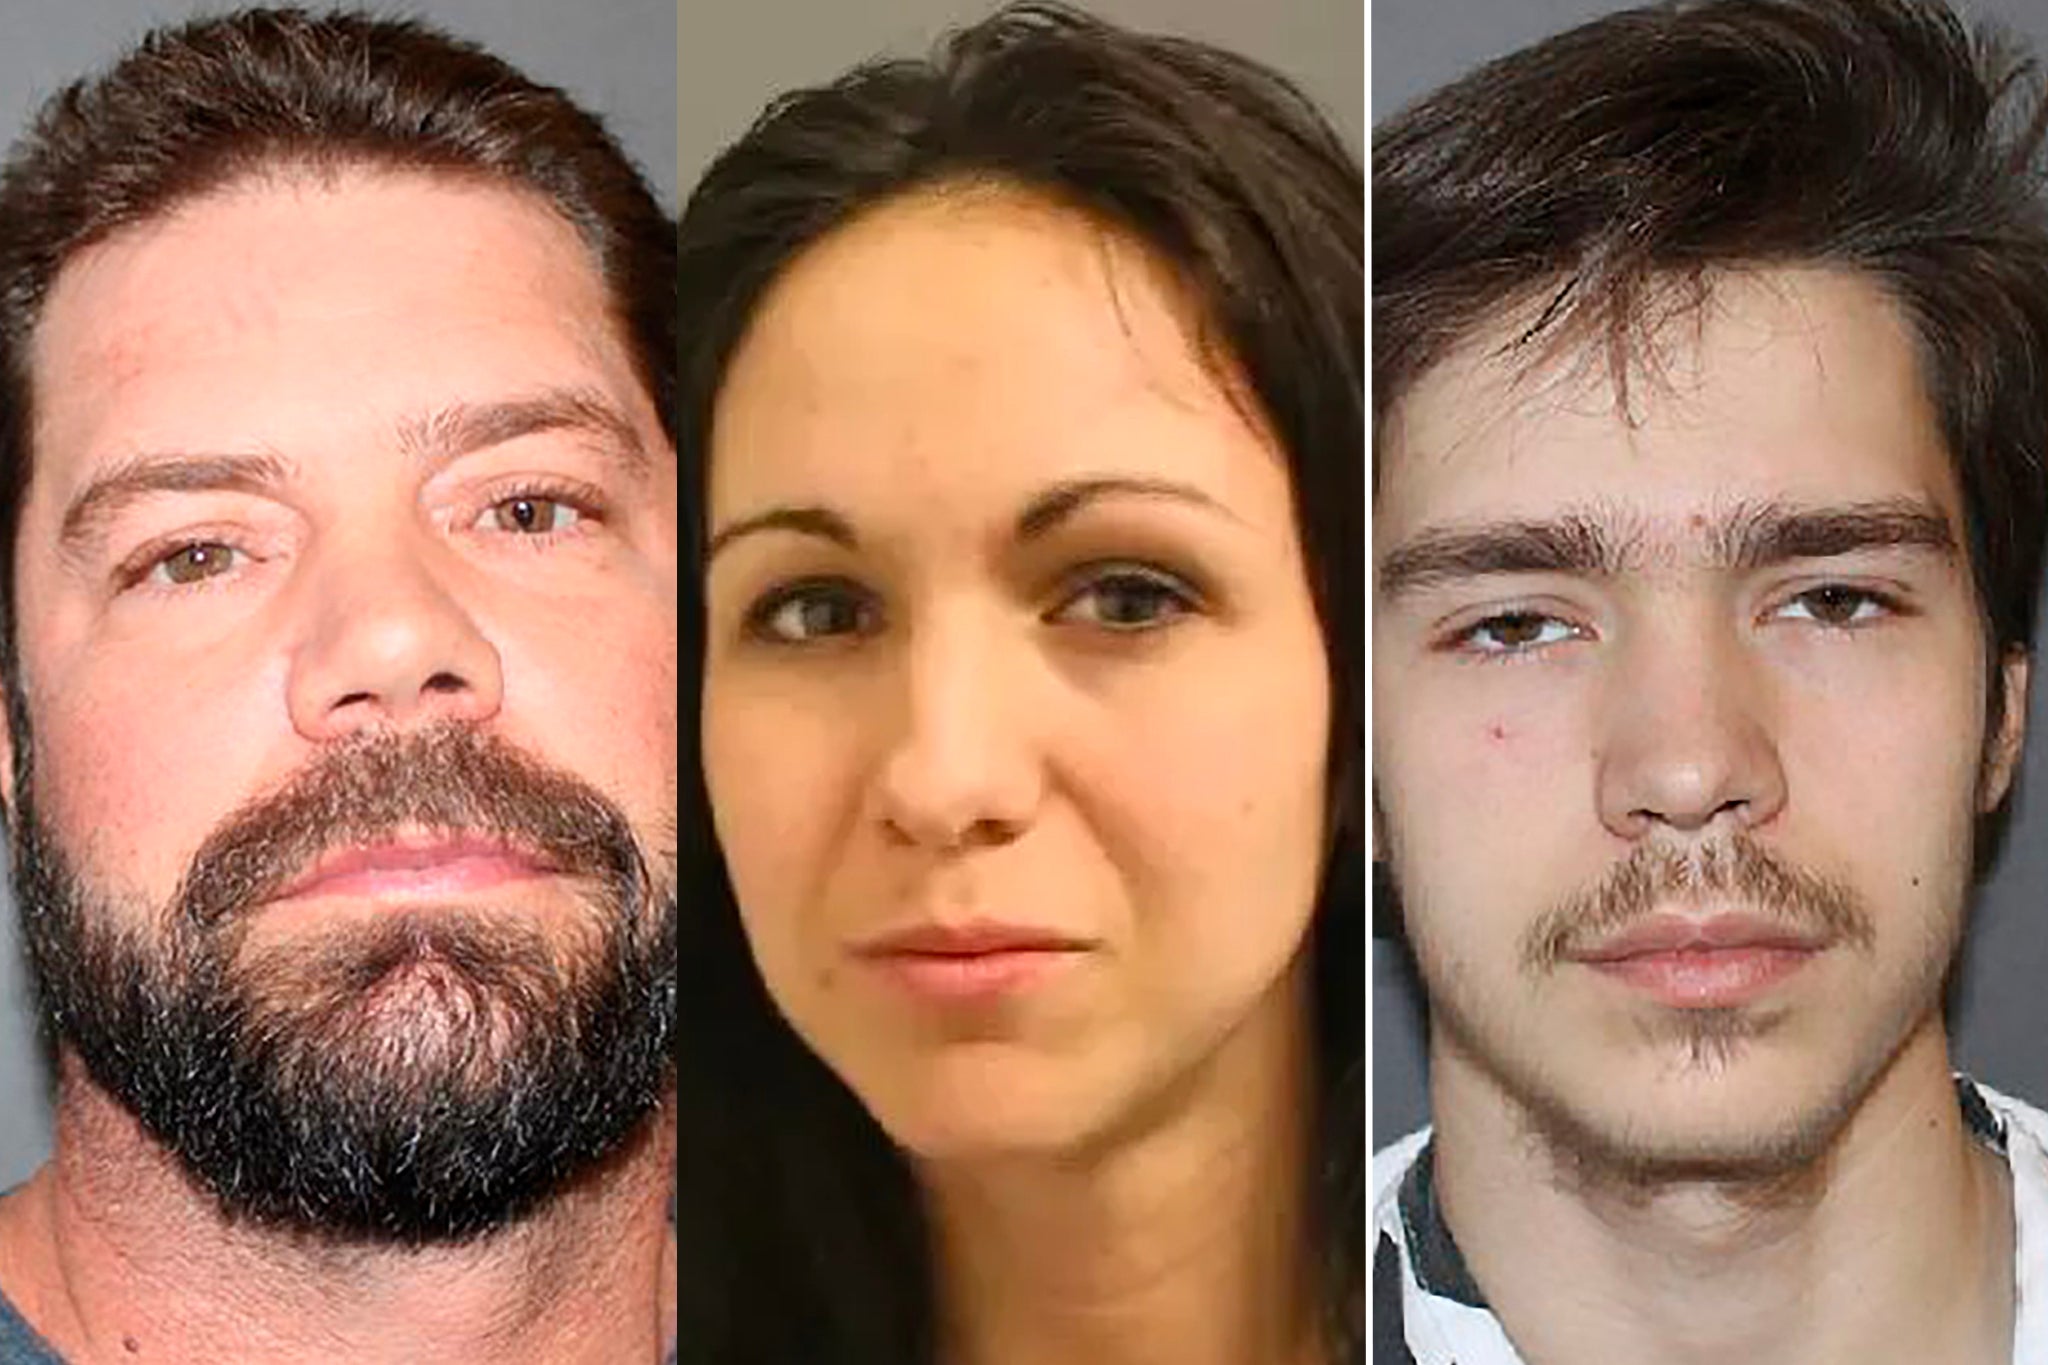 Republican Rep. Lauren Boebert, centre, is pictured in a mugshot from Colorado authorities, as are her ex-husband, Jayson, left, and 18-year-old son, Tyler, right – all in separate incidents, the most recent being the teen’s arrest this week